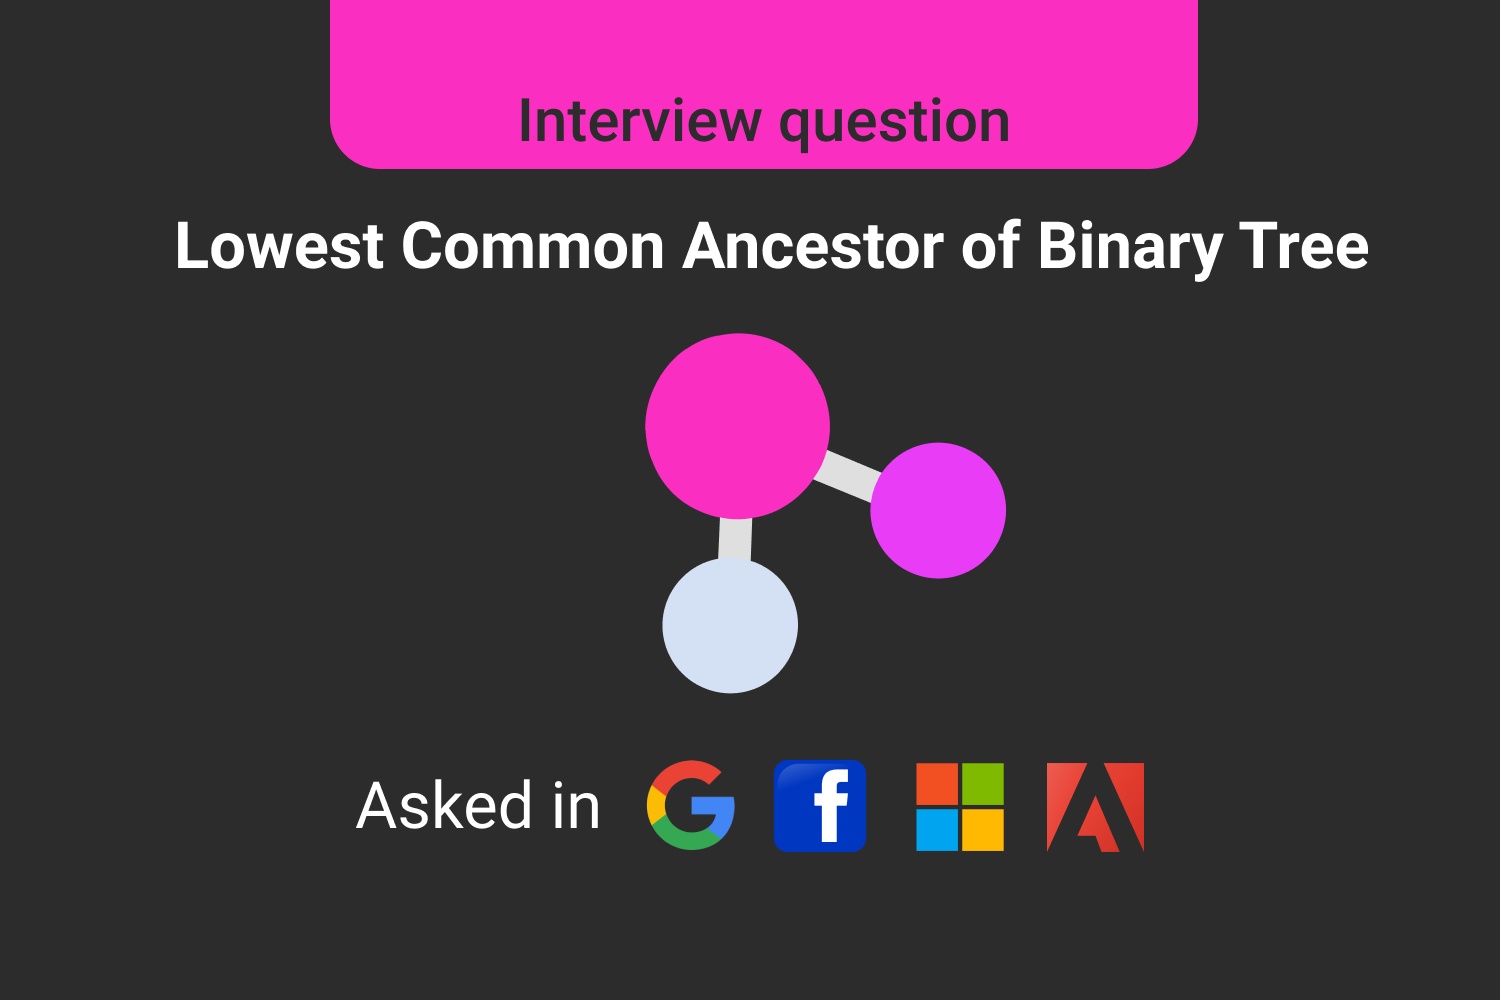 Lowest Common Ancestor of a Binary Tree